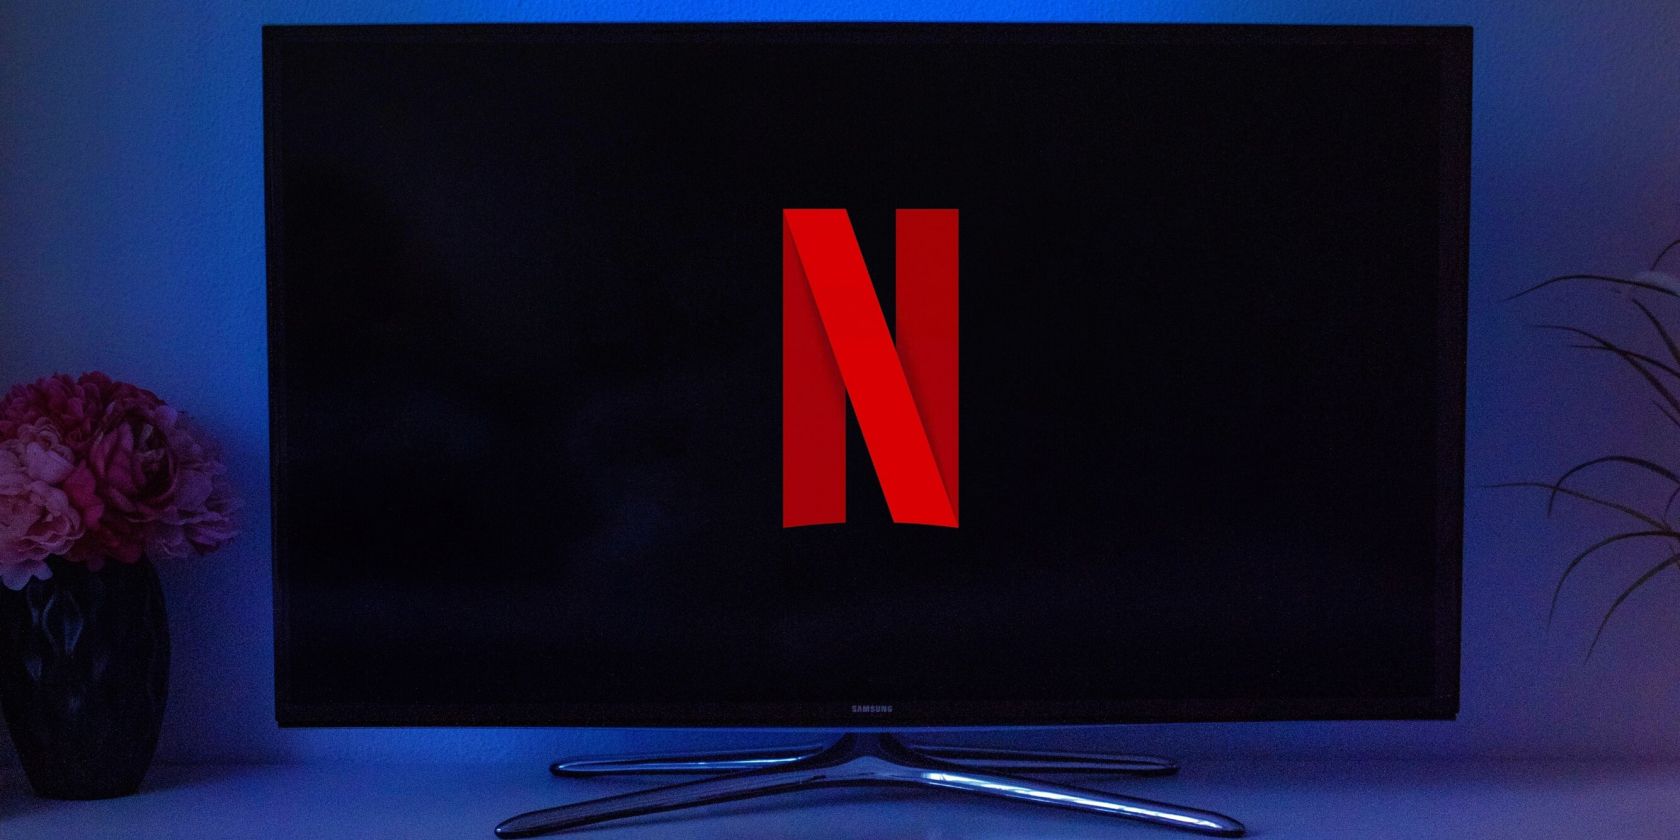 How to Unsubscribe from Netflix on Your Smart TV